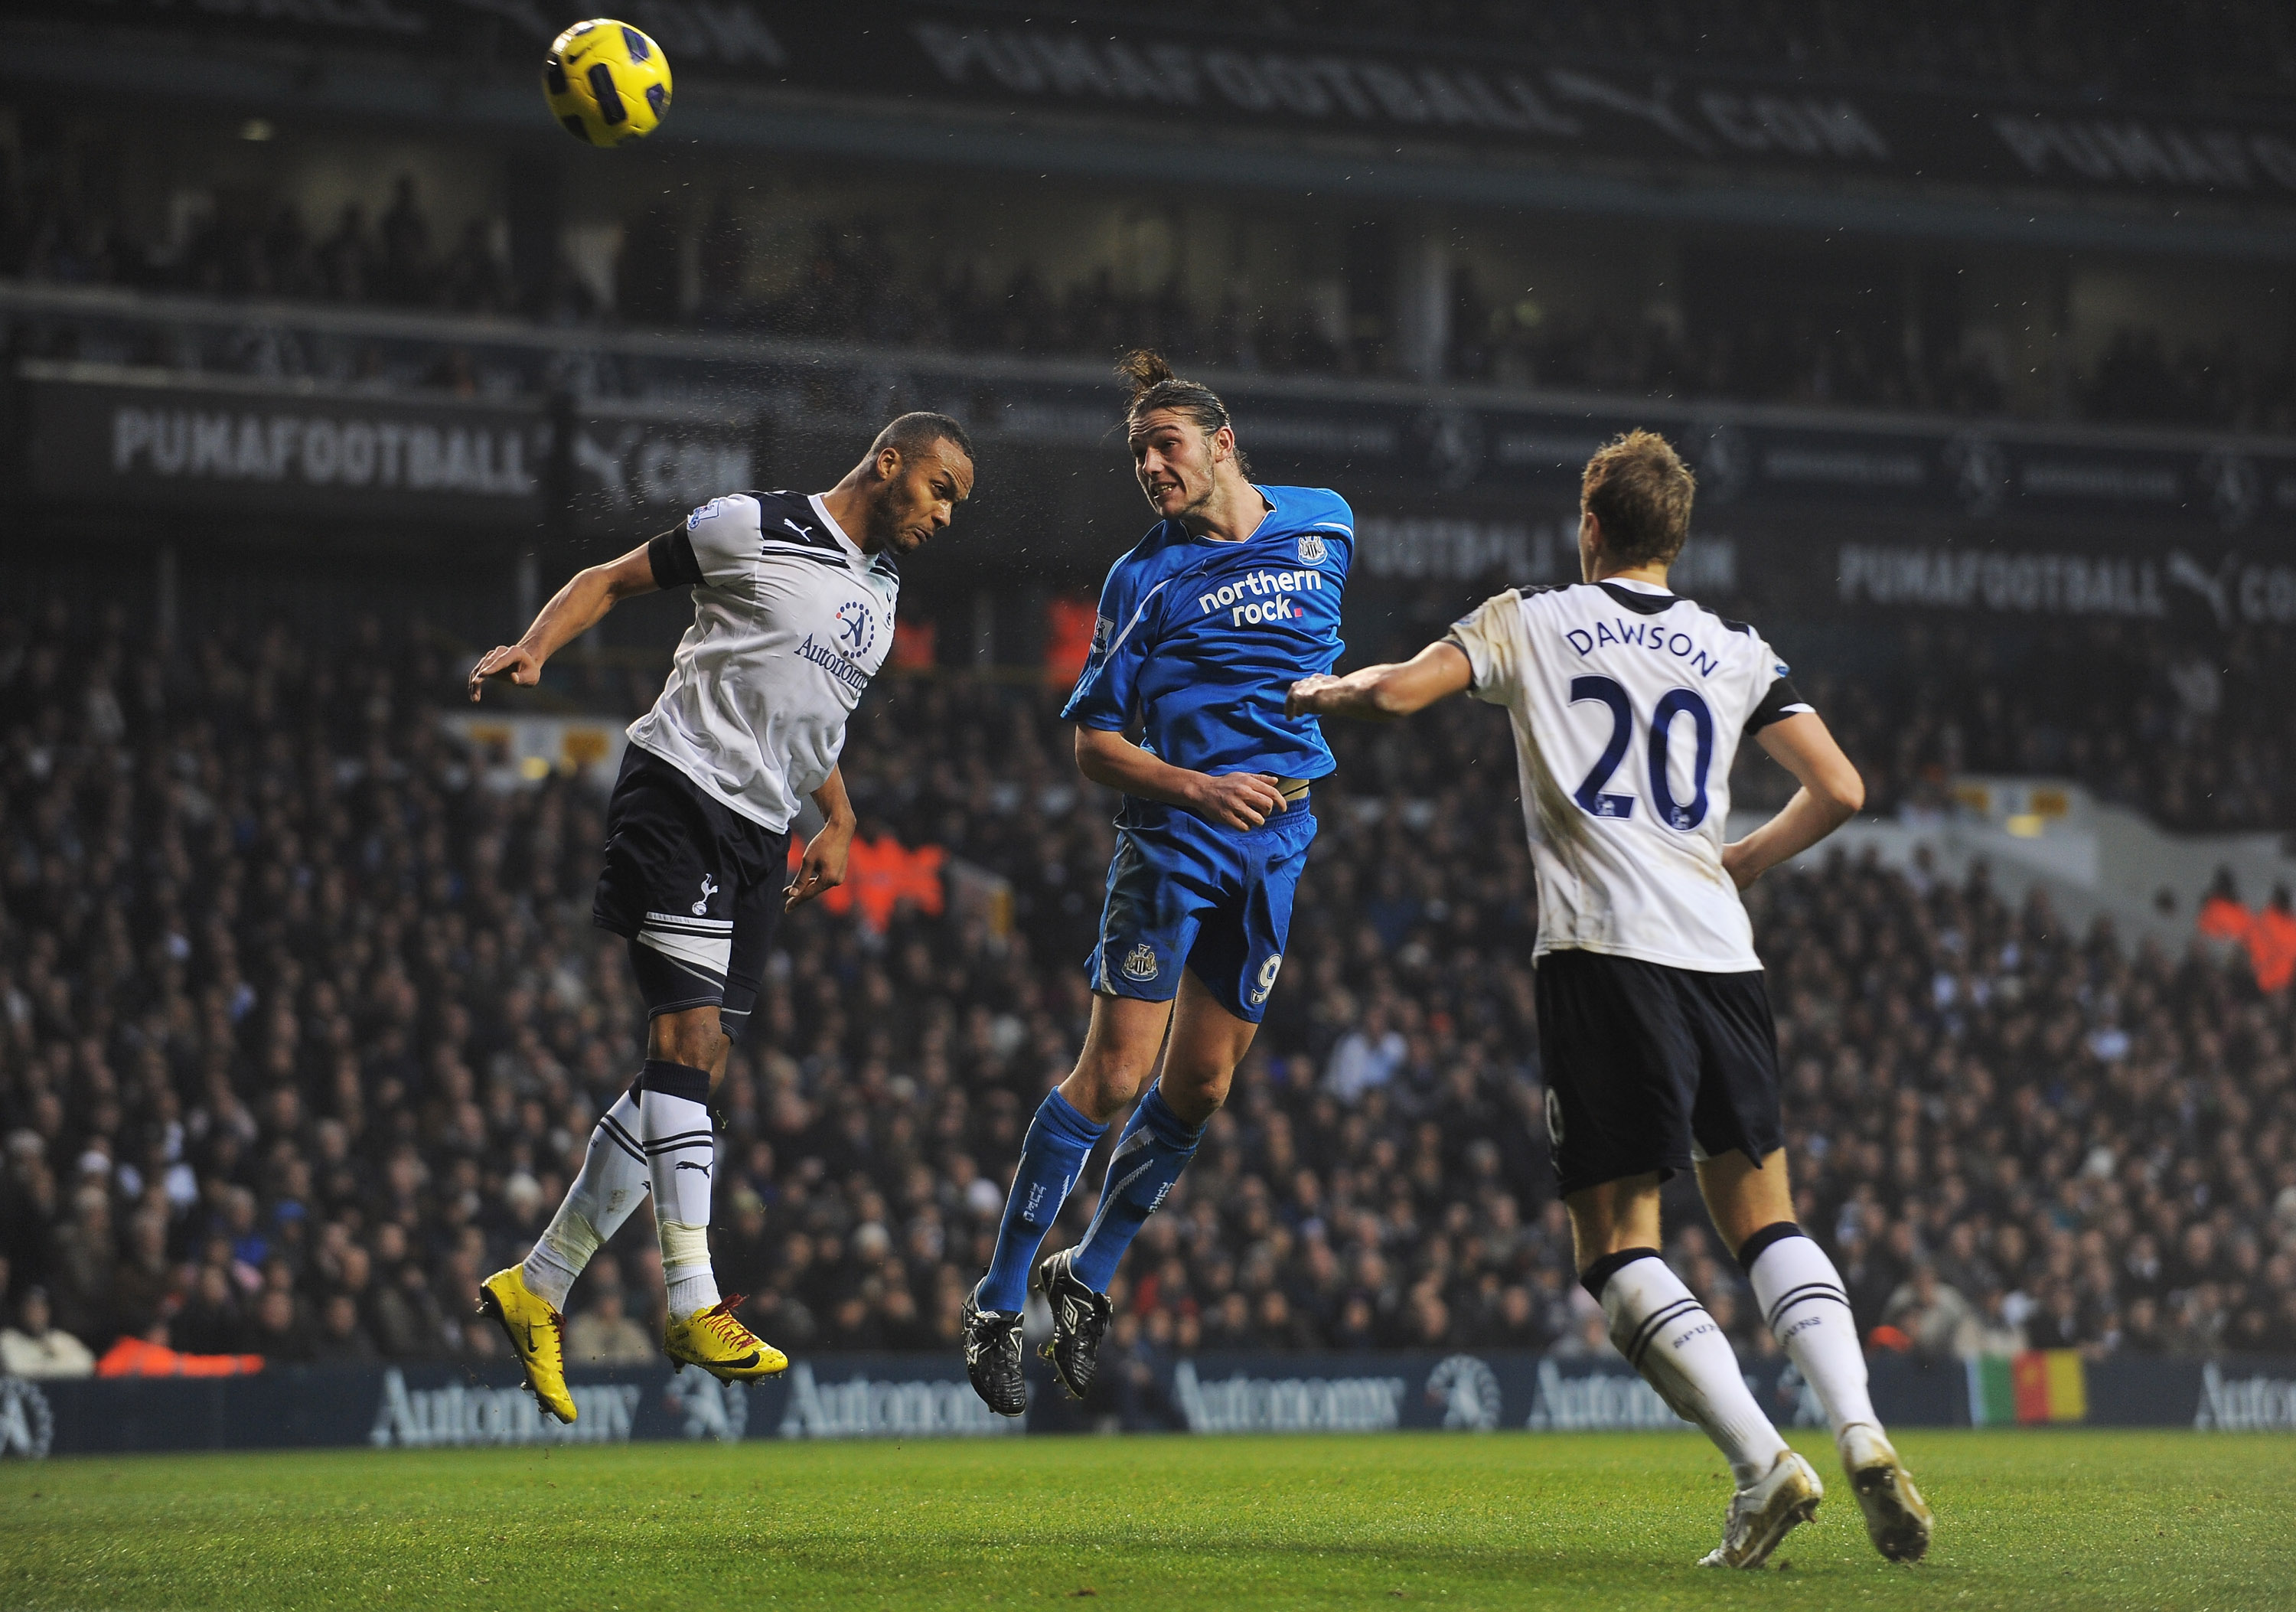 LONDON, ENGLAND - DECEMBER 28:  Andy Carroll of Newcastle United wins a header against Younes Kaboul of Tottenham Hotspur during the Barclays Premier League match between Tottenham Hotspur and Newcastle United at White Hart Lane on December 28, 2010 in Lo